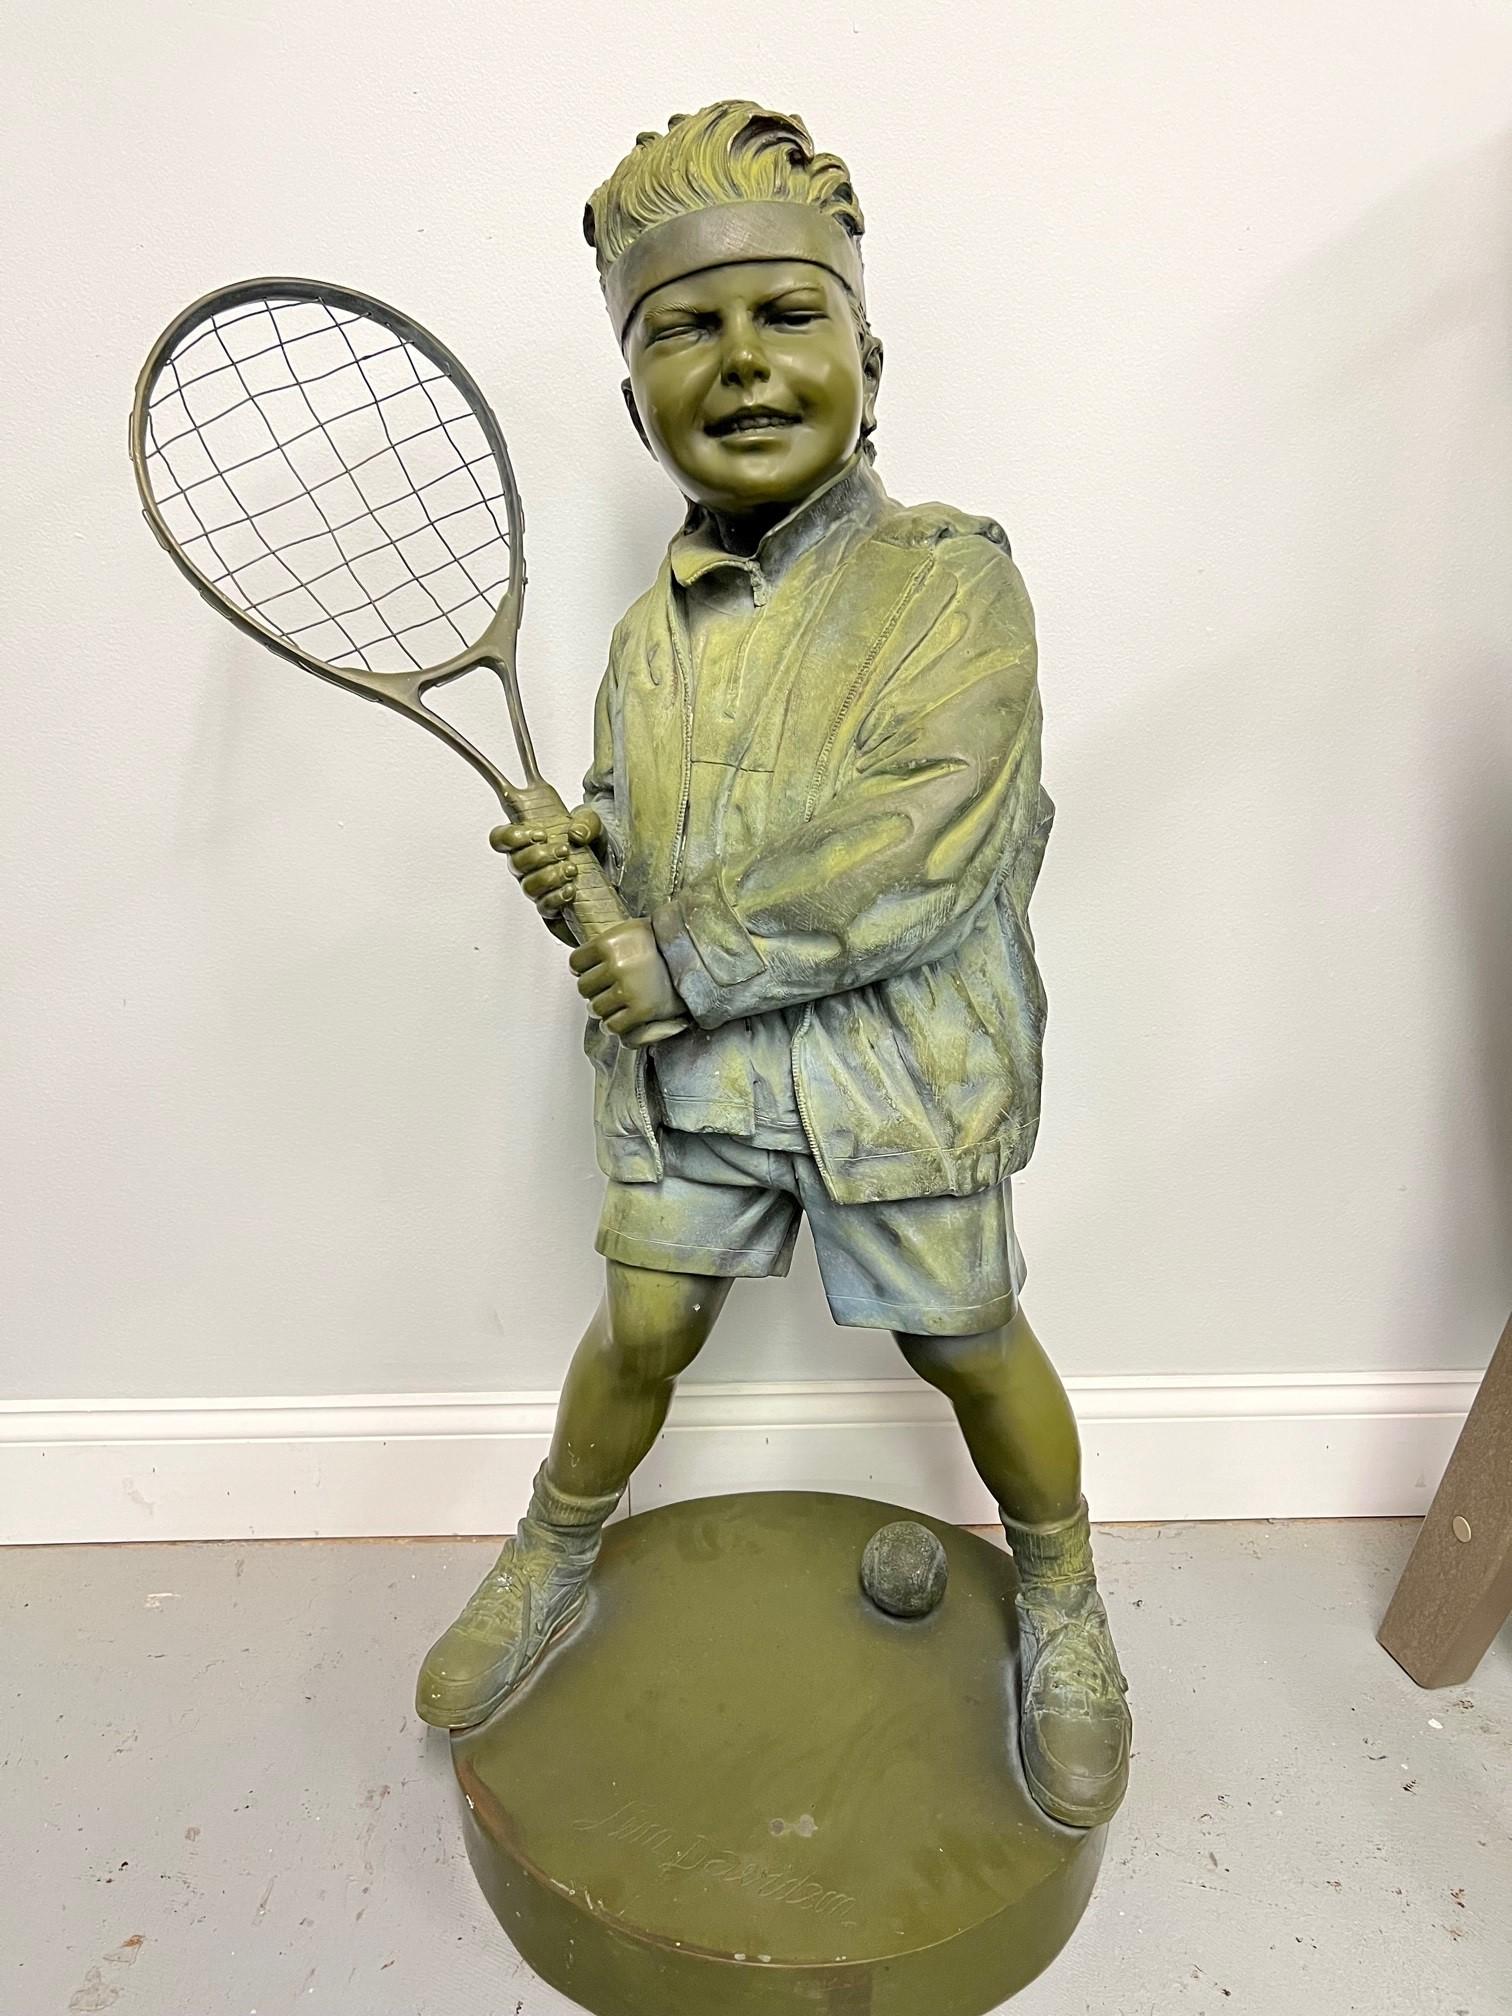 Late 20th century bronze statue of a boy playing tennis or pickleball. The bronze statue is in very good condition but has been outside and is weathered but still looks great. A fun piece that would look amazing in a yard or garden especially next